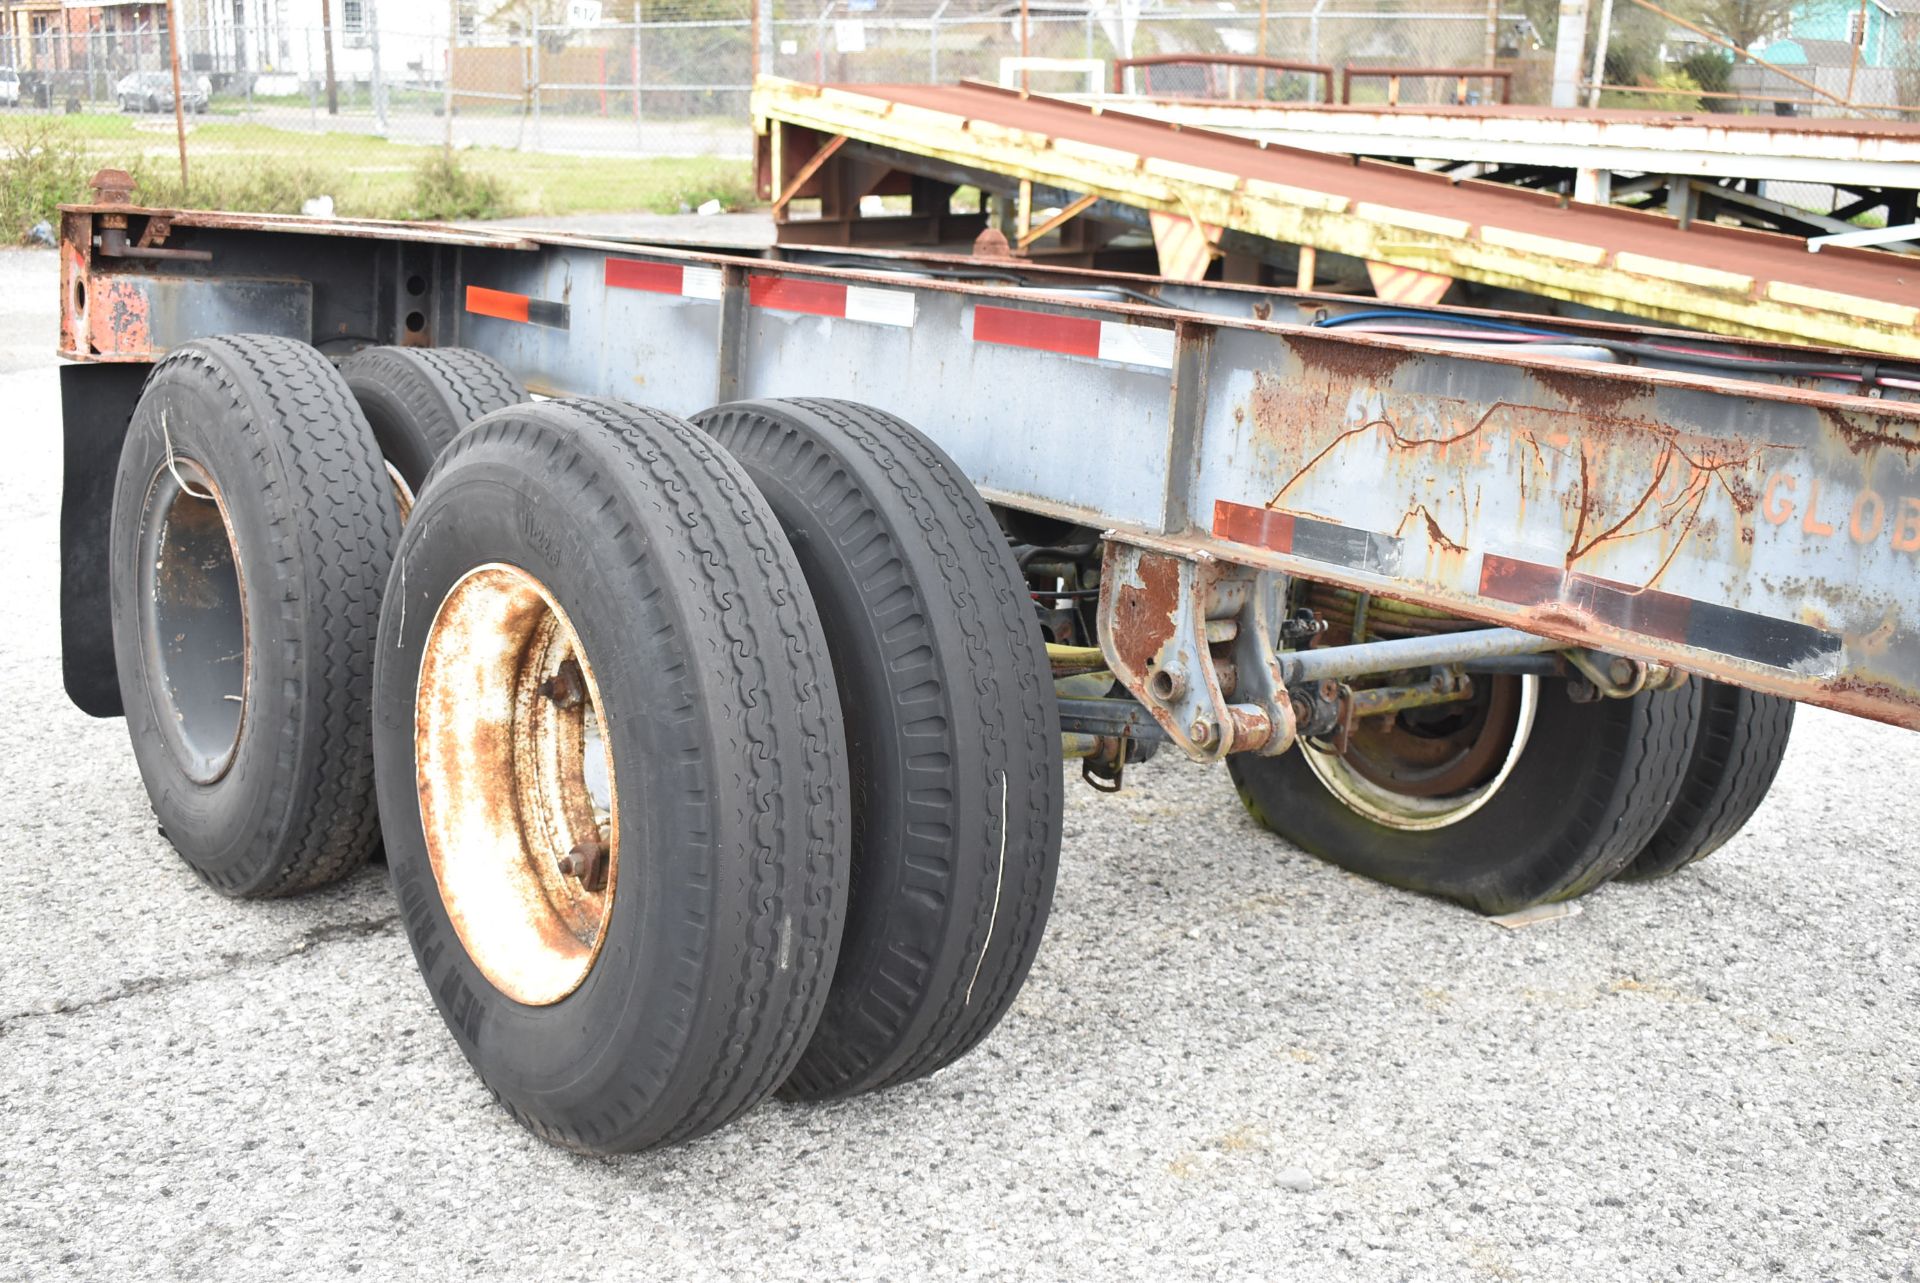 STRICK 40/45' TANDEM AXLE TROMBONE EXTENDABLE CONTAINER TRAILER WITH 65,000 LB. GVWR CAPACITY, - Image 3 of 7